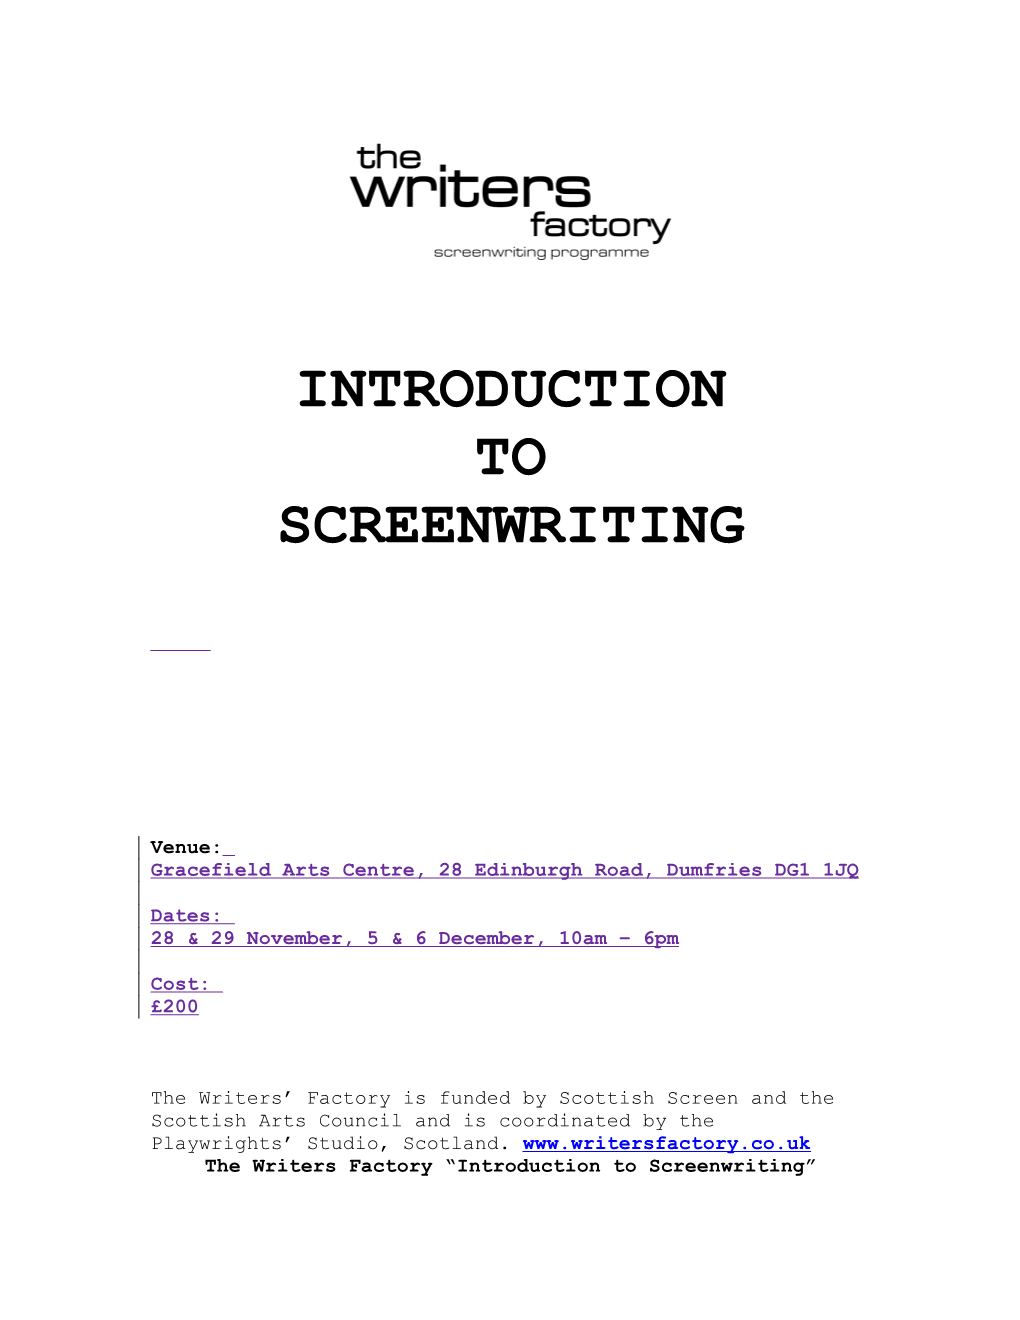 The Writers Factory Introduction to Screenwriting